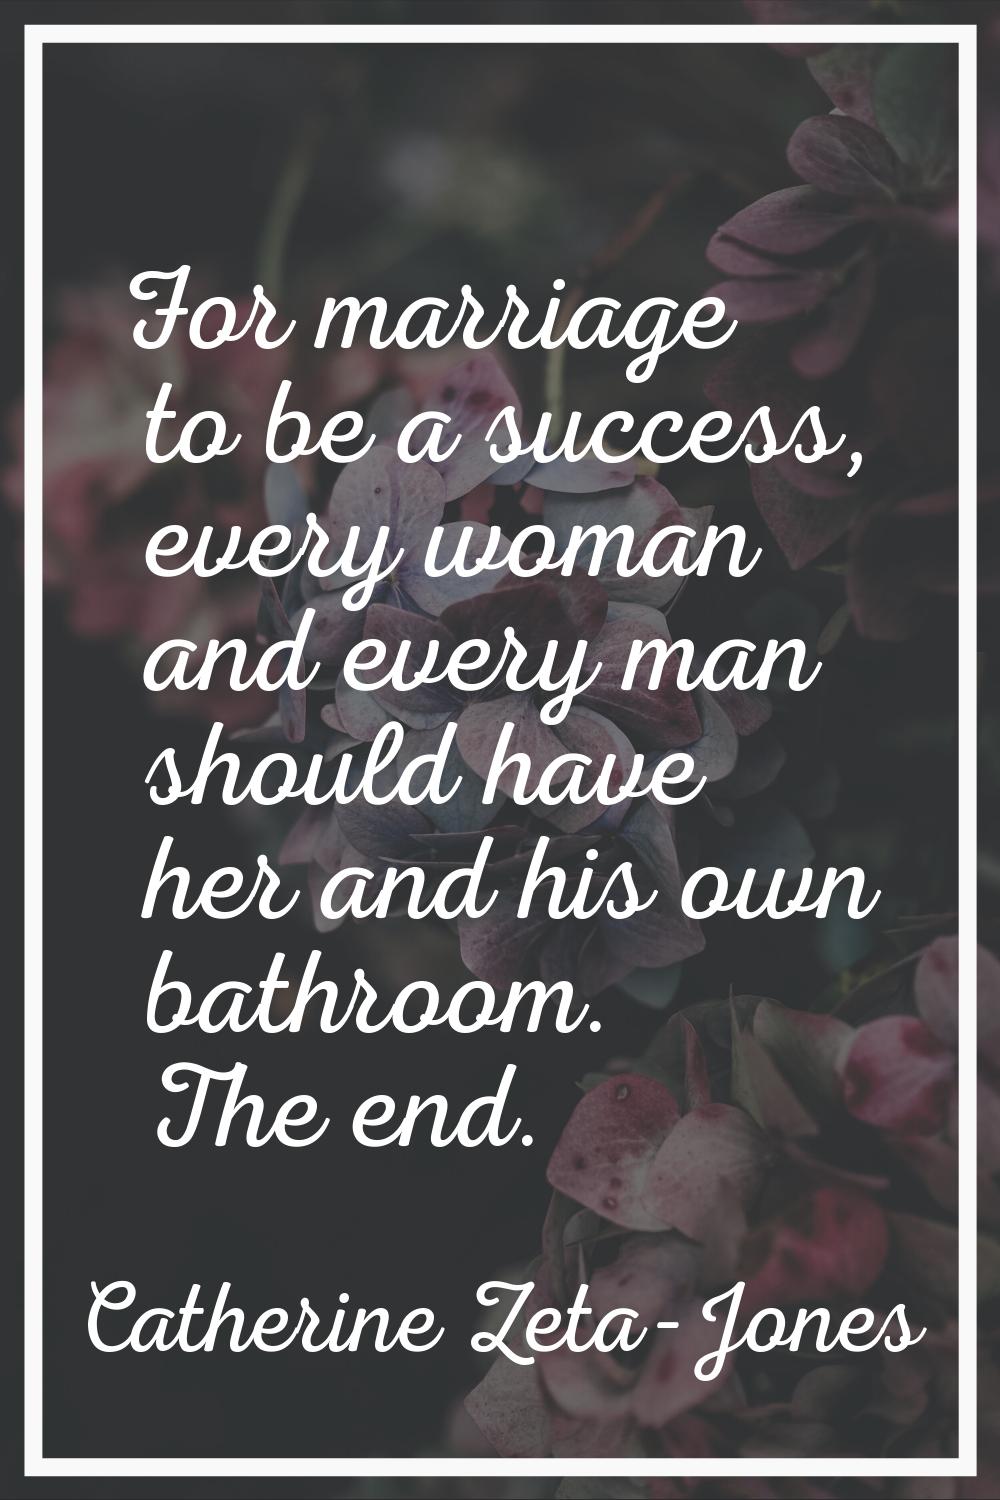 For marriage to be a success, every woman and every man should have her and his own bathroom. The e